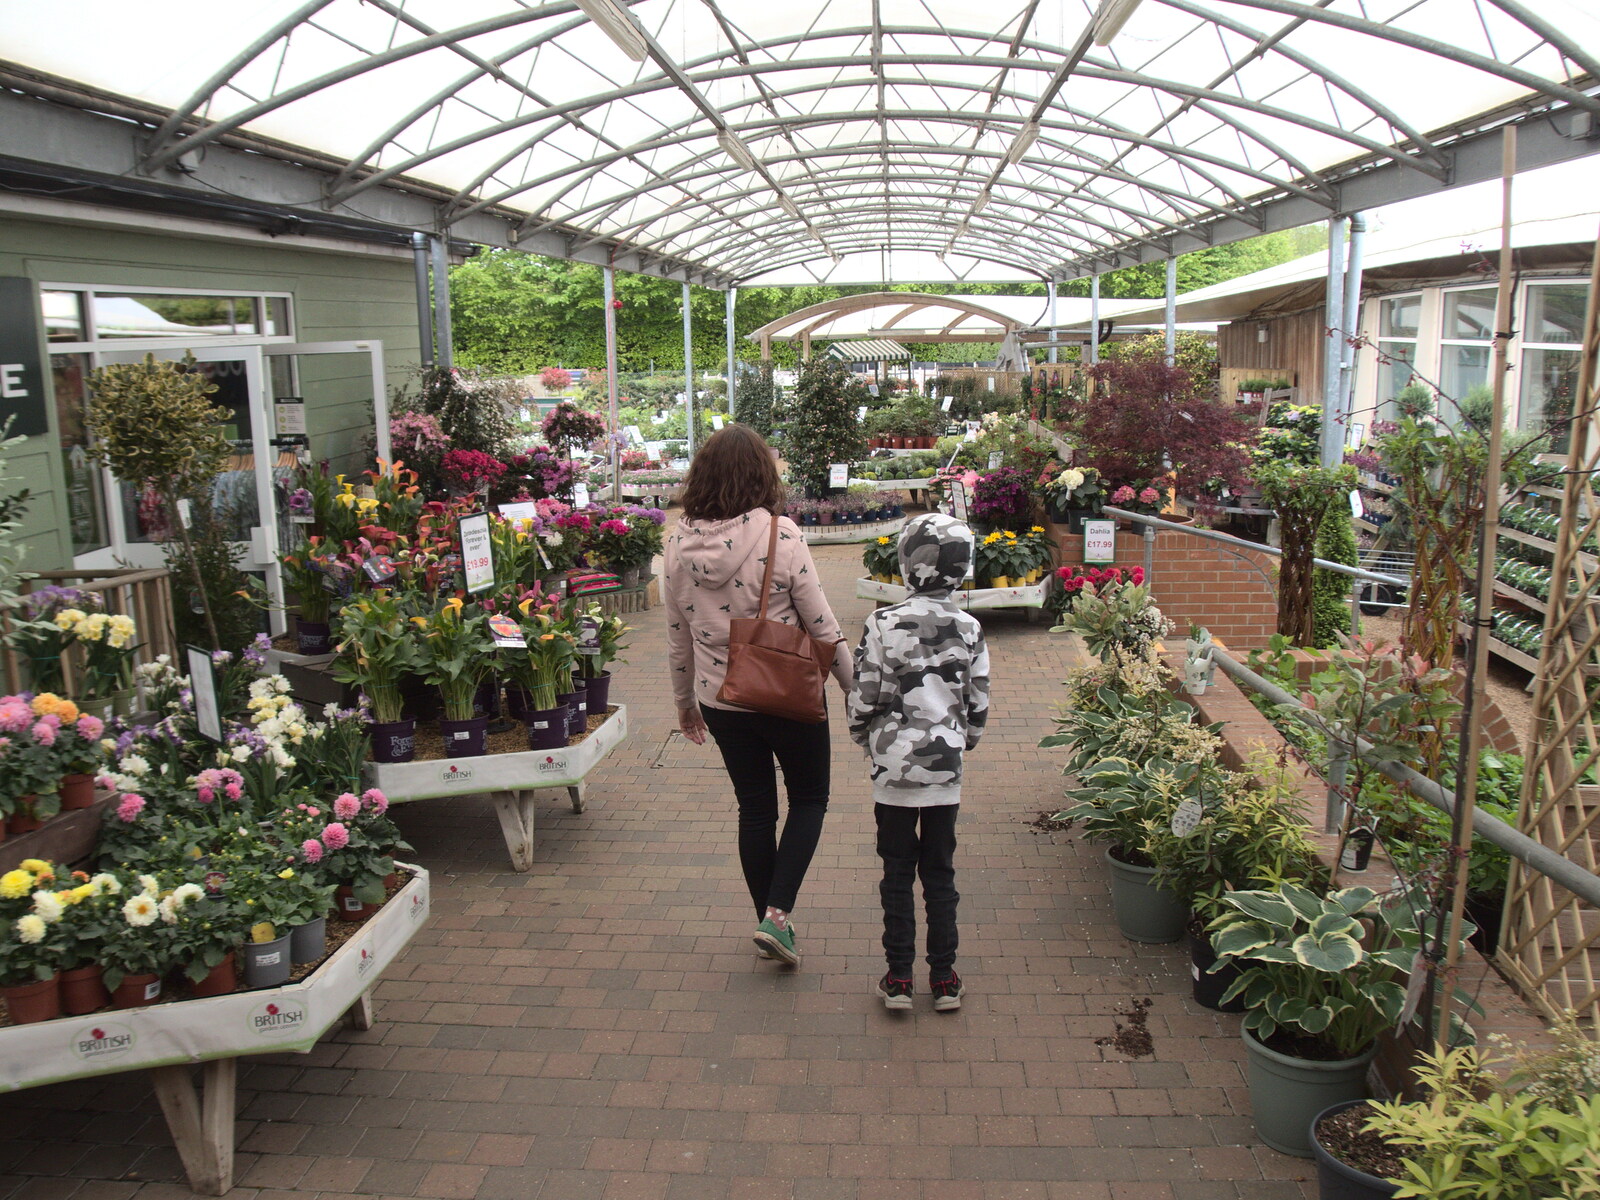 We visit Bressingham Garden Centre as well from Garden Centres, and Hamish Visits, Brome, Suffolk - 28th May 2021